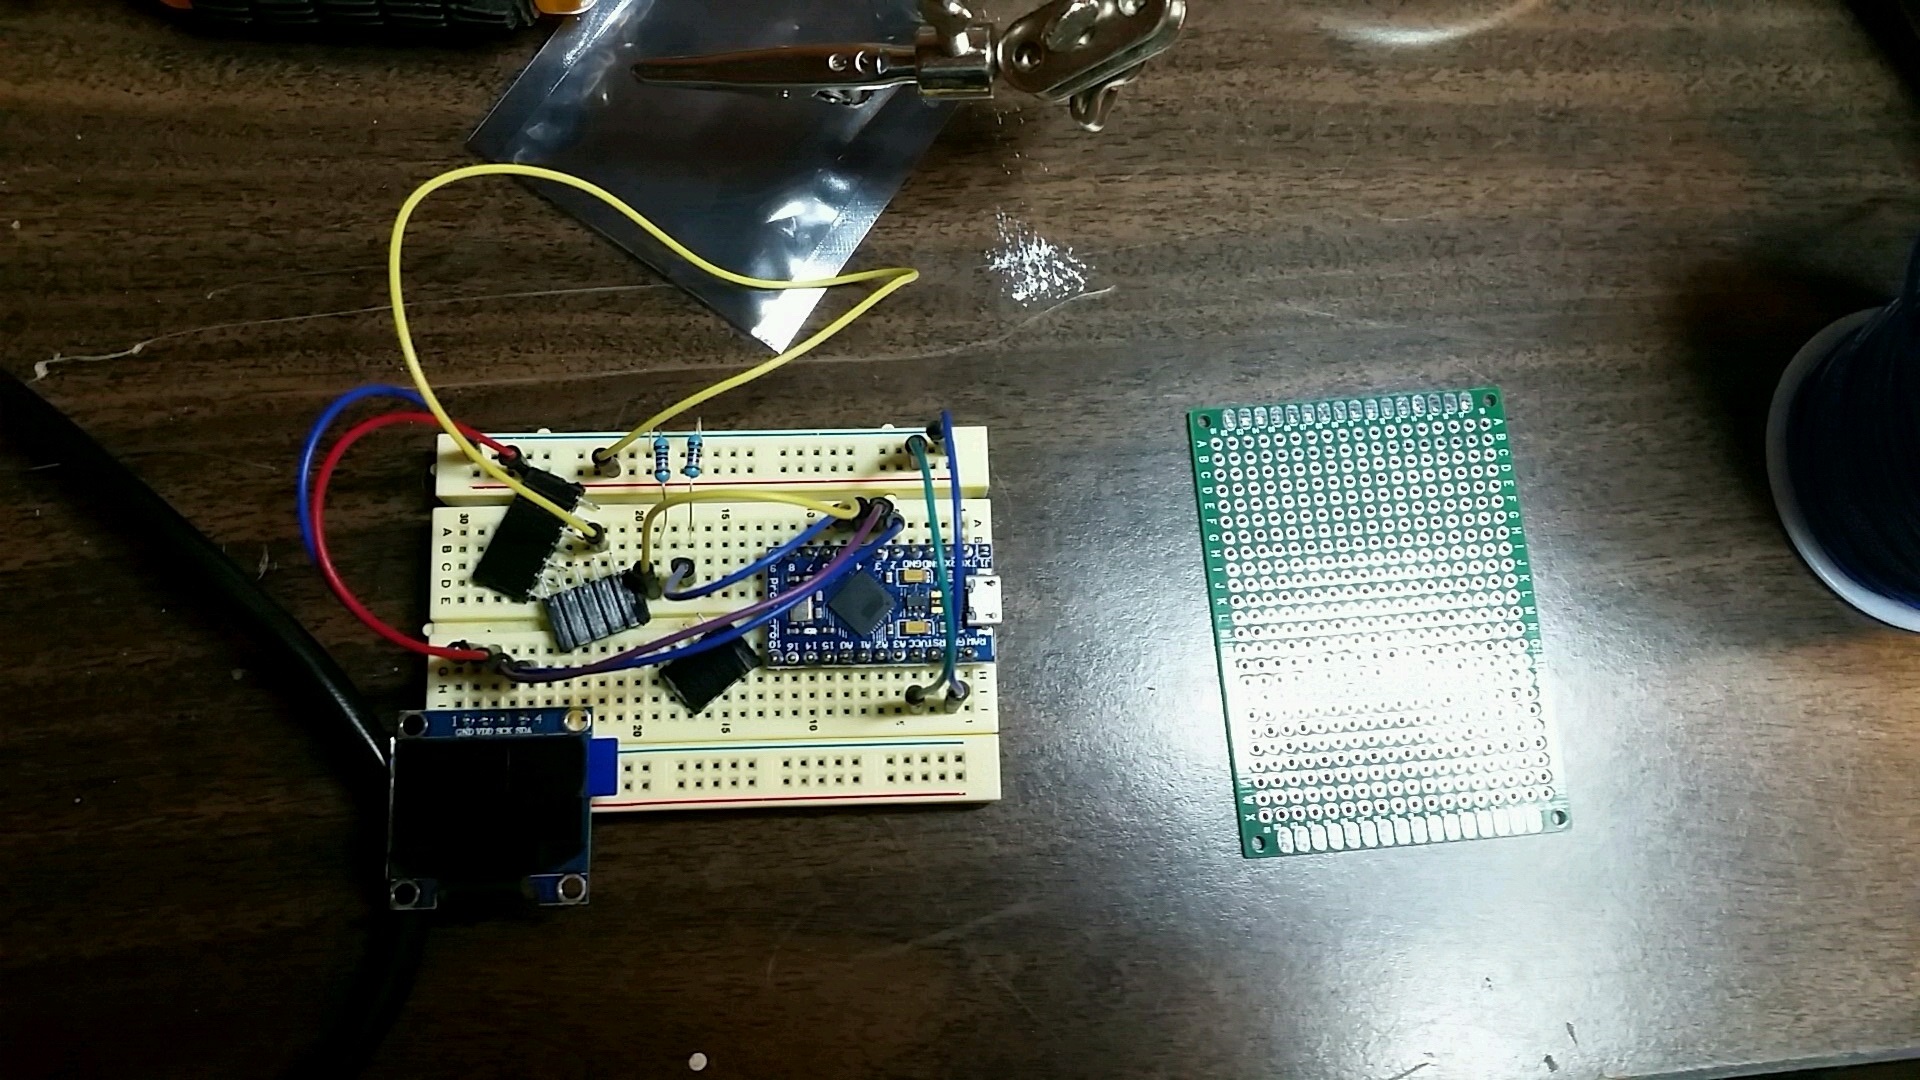 Image of breadboard next to circuitboard used for creating second prototype.